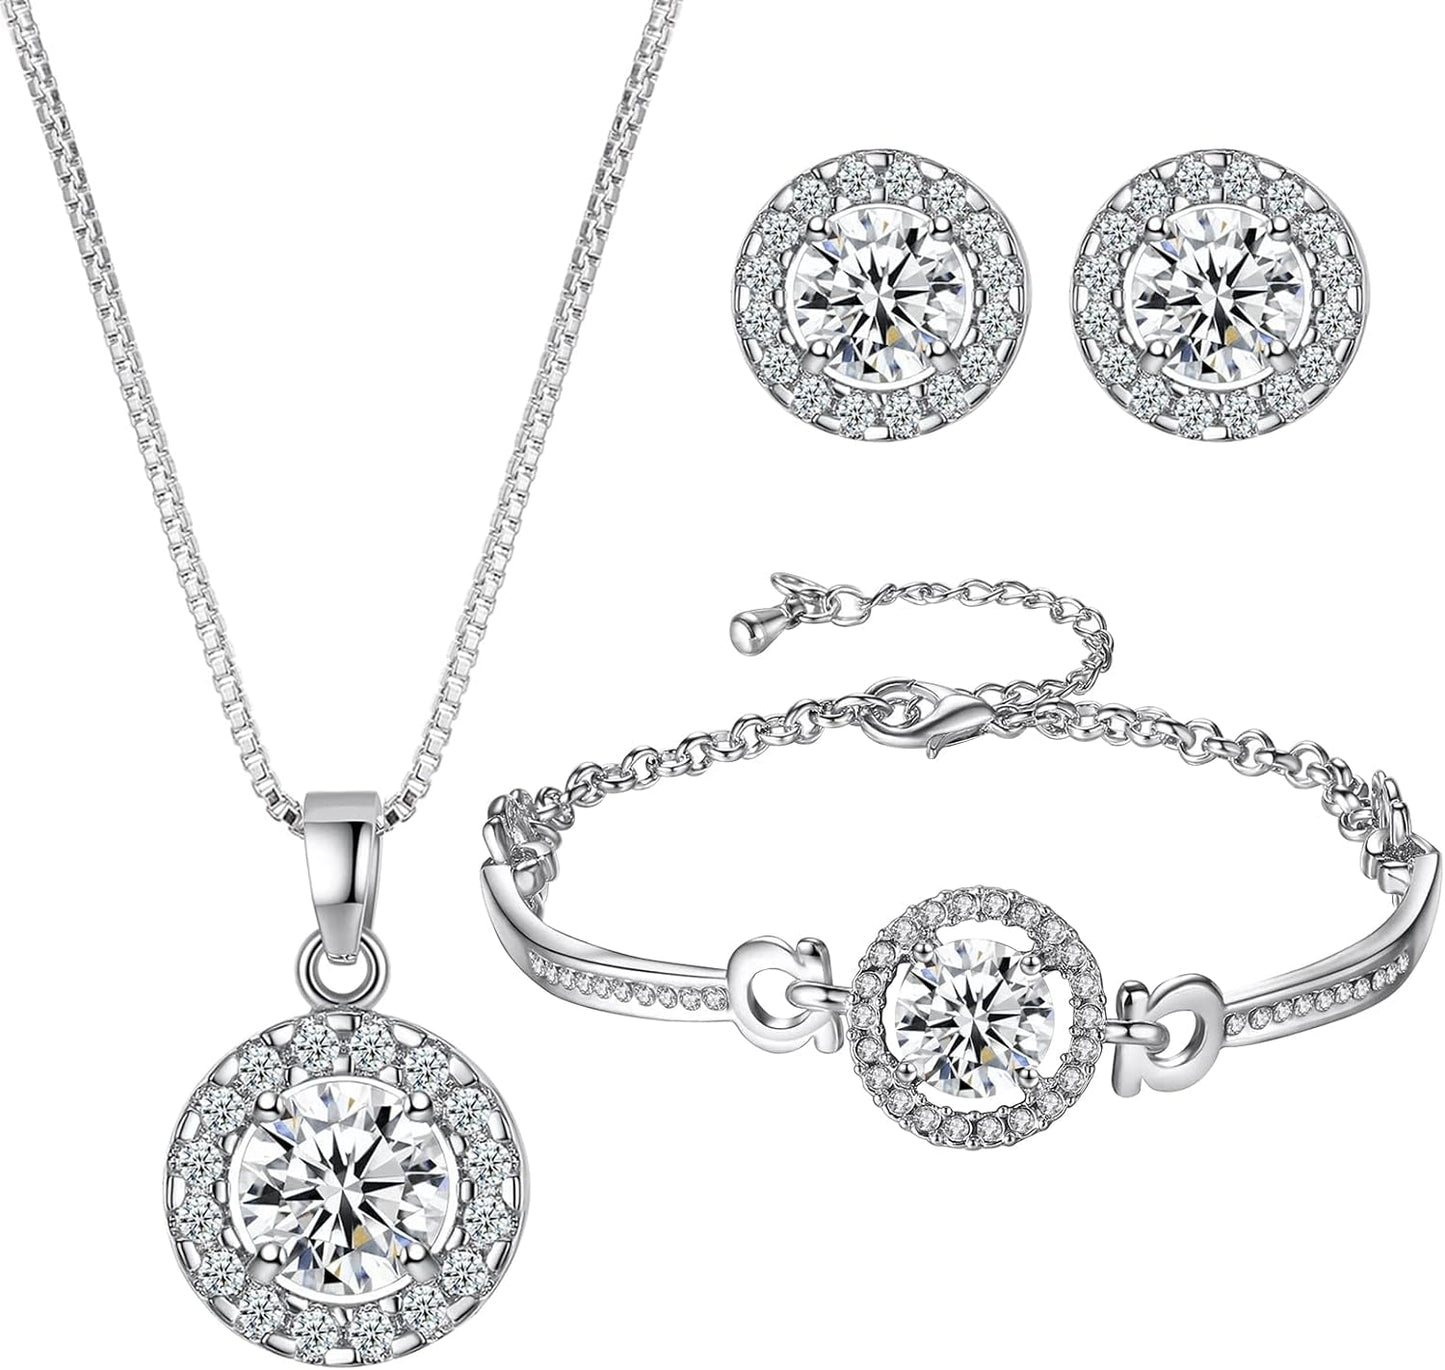 Azonee Jewellery Sets for Women Cubic Zirconia Necklace Earring Sets Bling Rhinestone Bridesmaid Jewelry Set